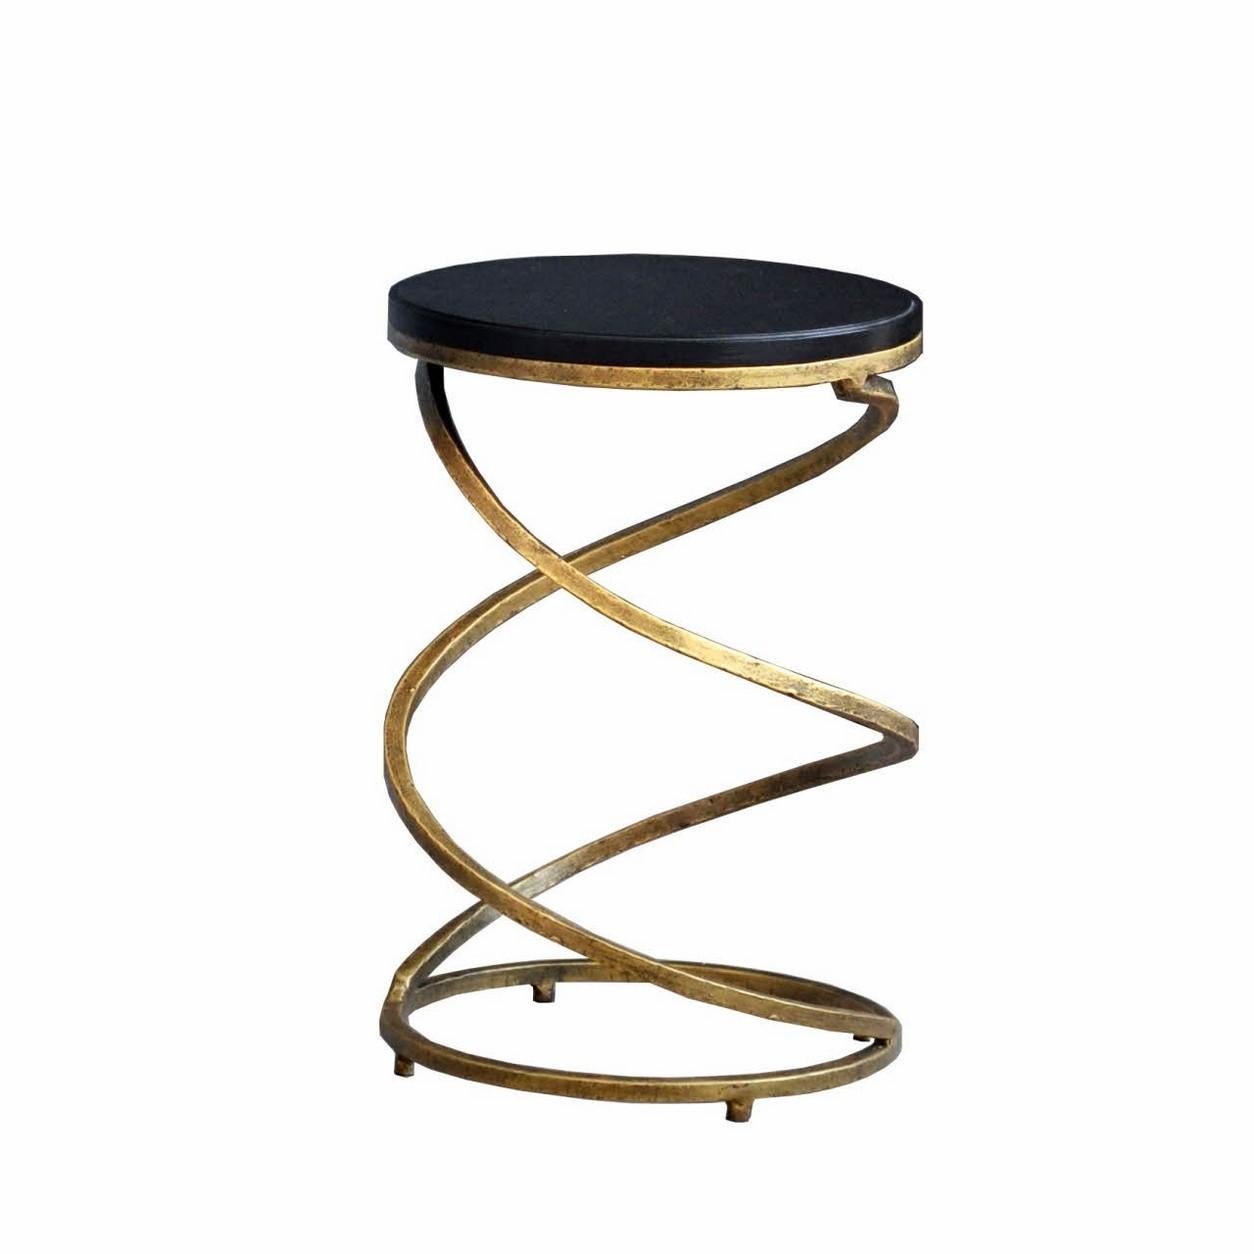 Pair of side tables consisting of a graphic and geometric hammered wrought iron metal feet with a round black wooden tray.